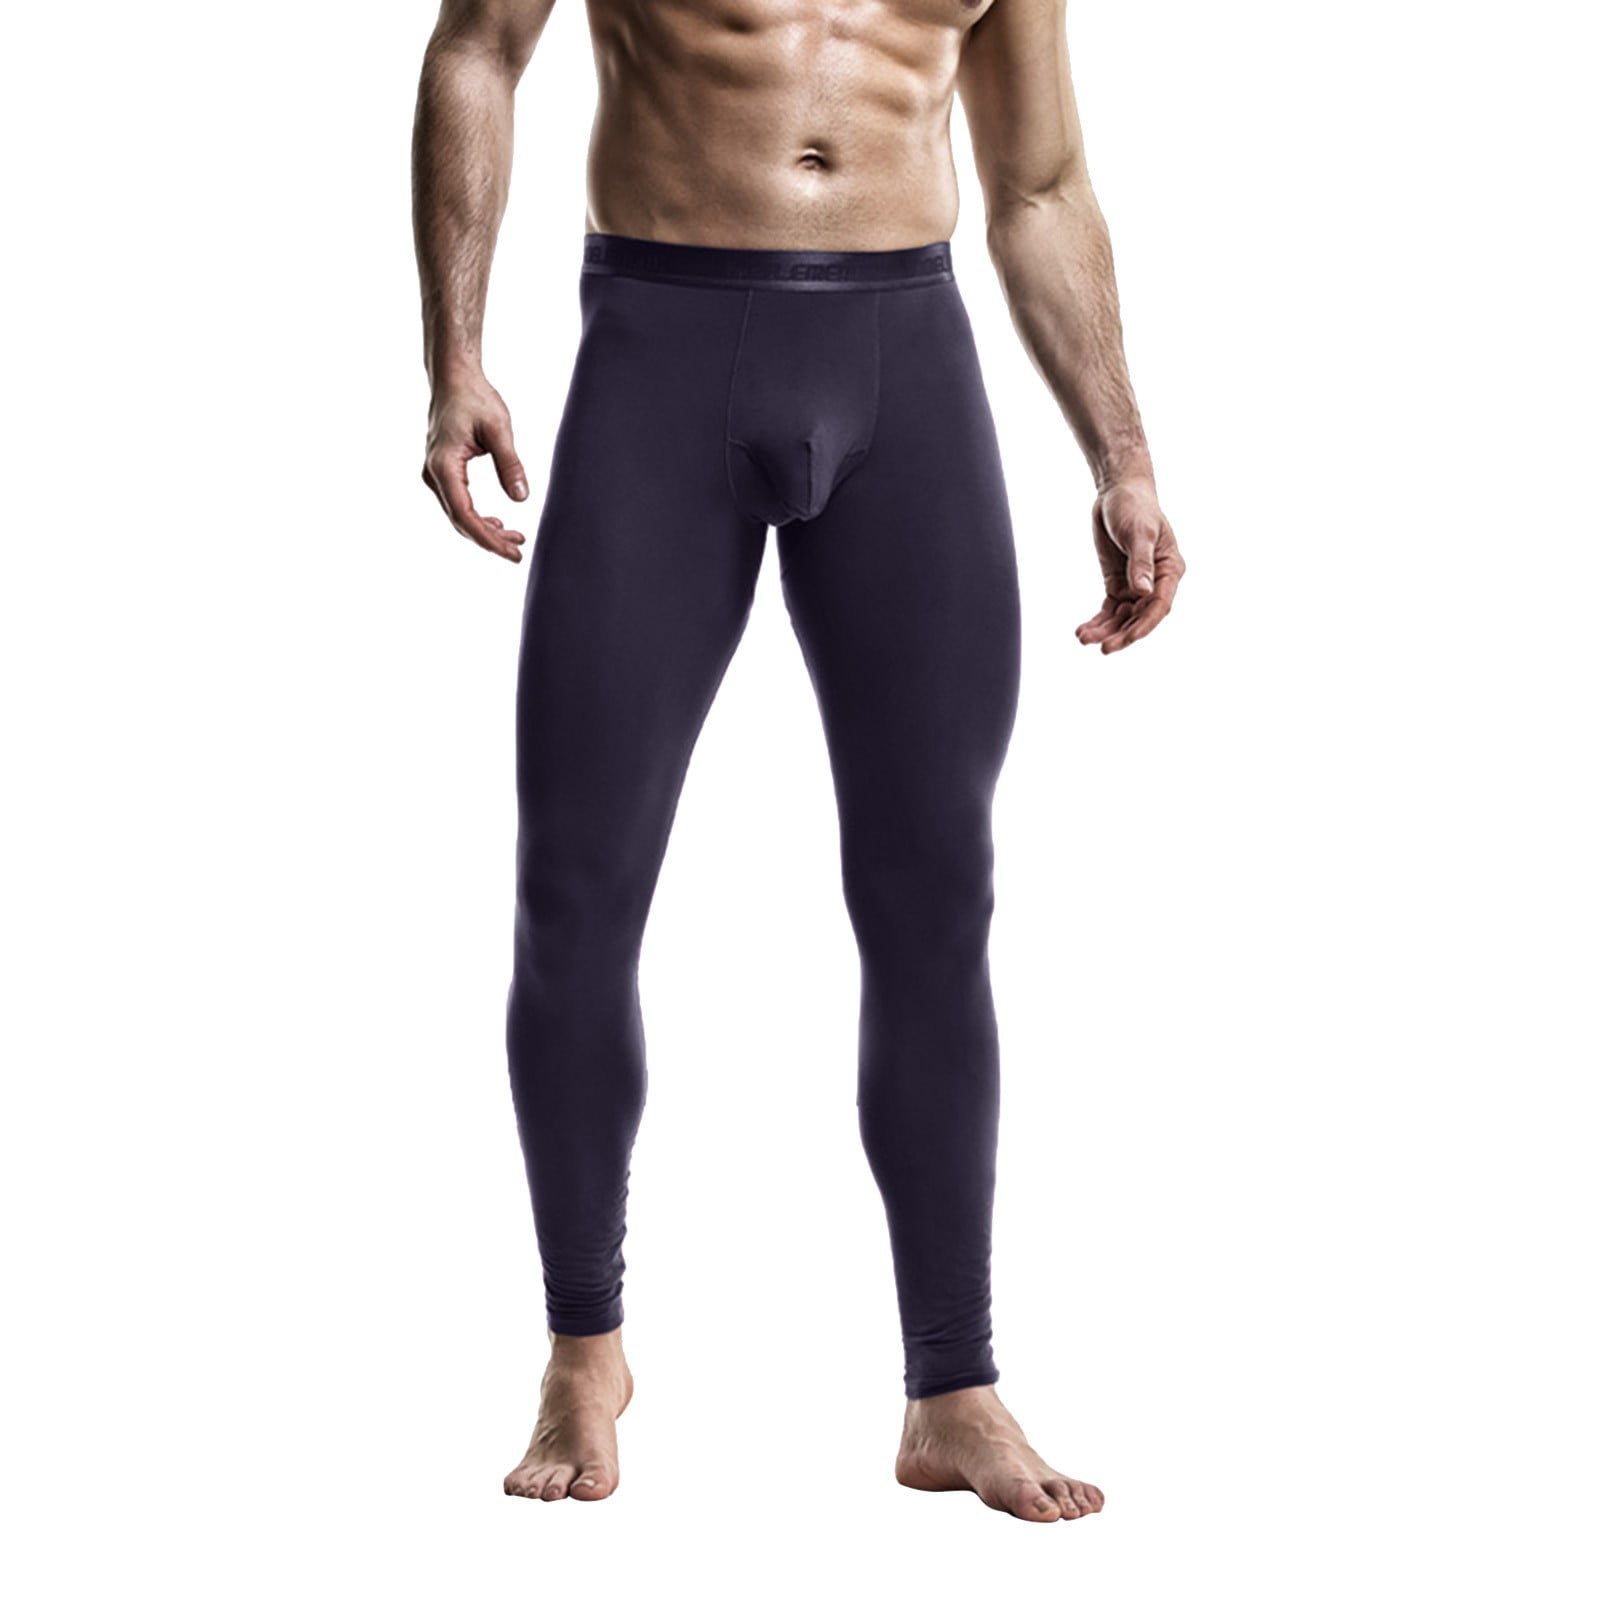 KEW2 Duofold Varitherm Performance 2-Layer Mens Thermal Pants Size Small,  Black 